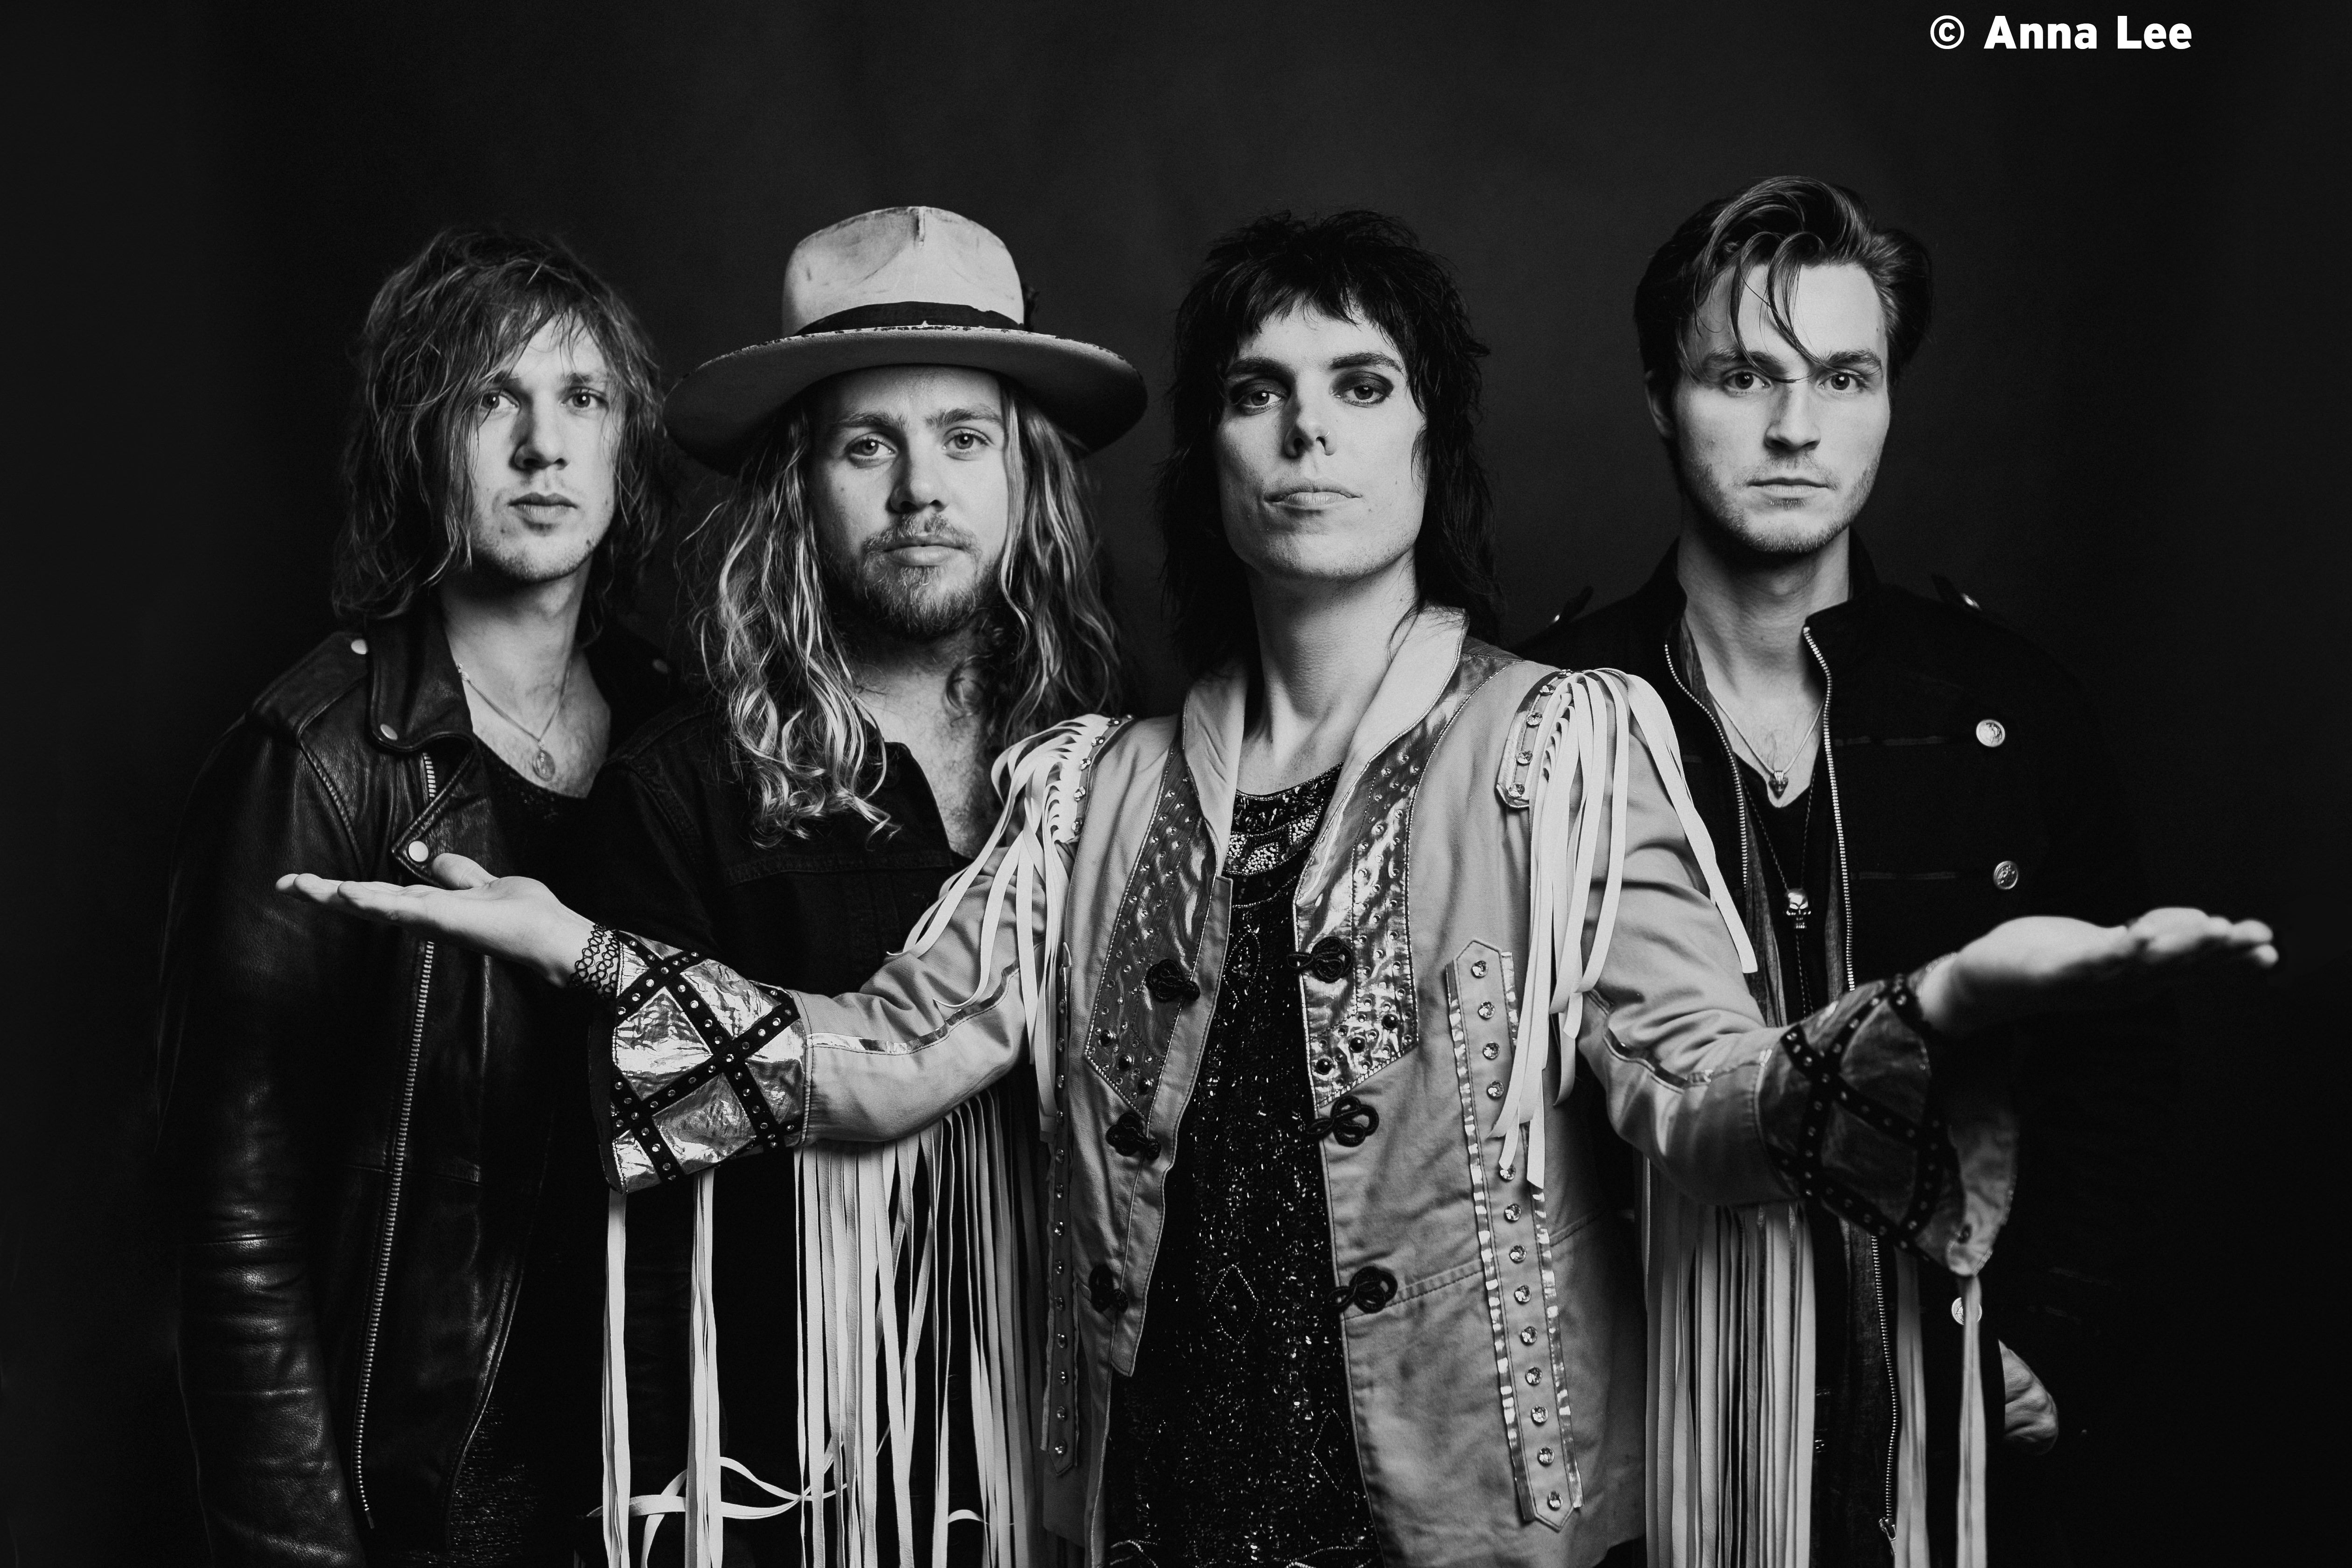 The Struts at Manchester Music Hall